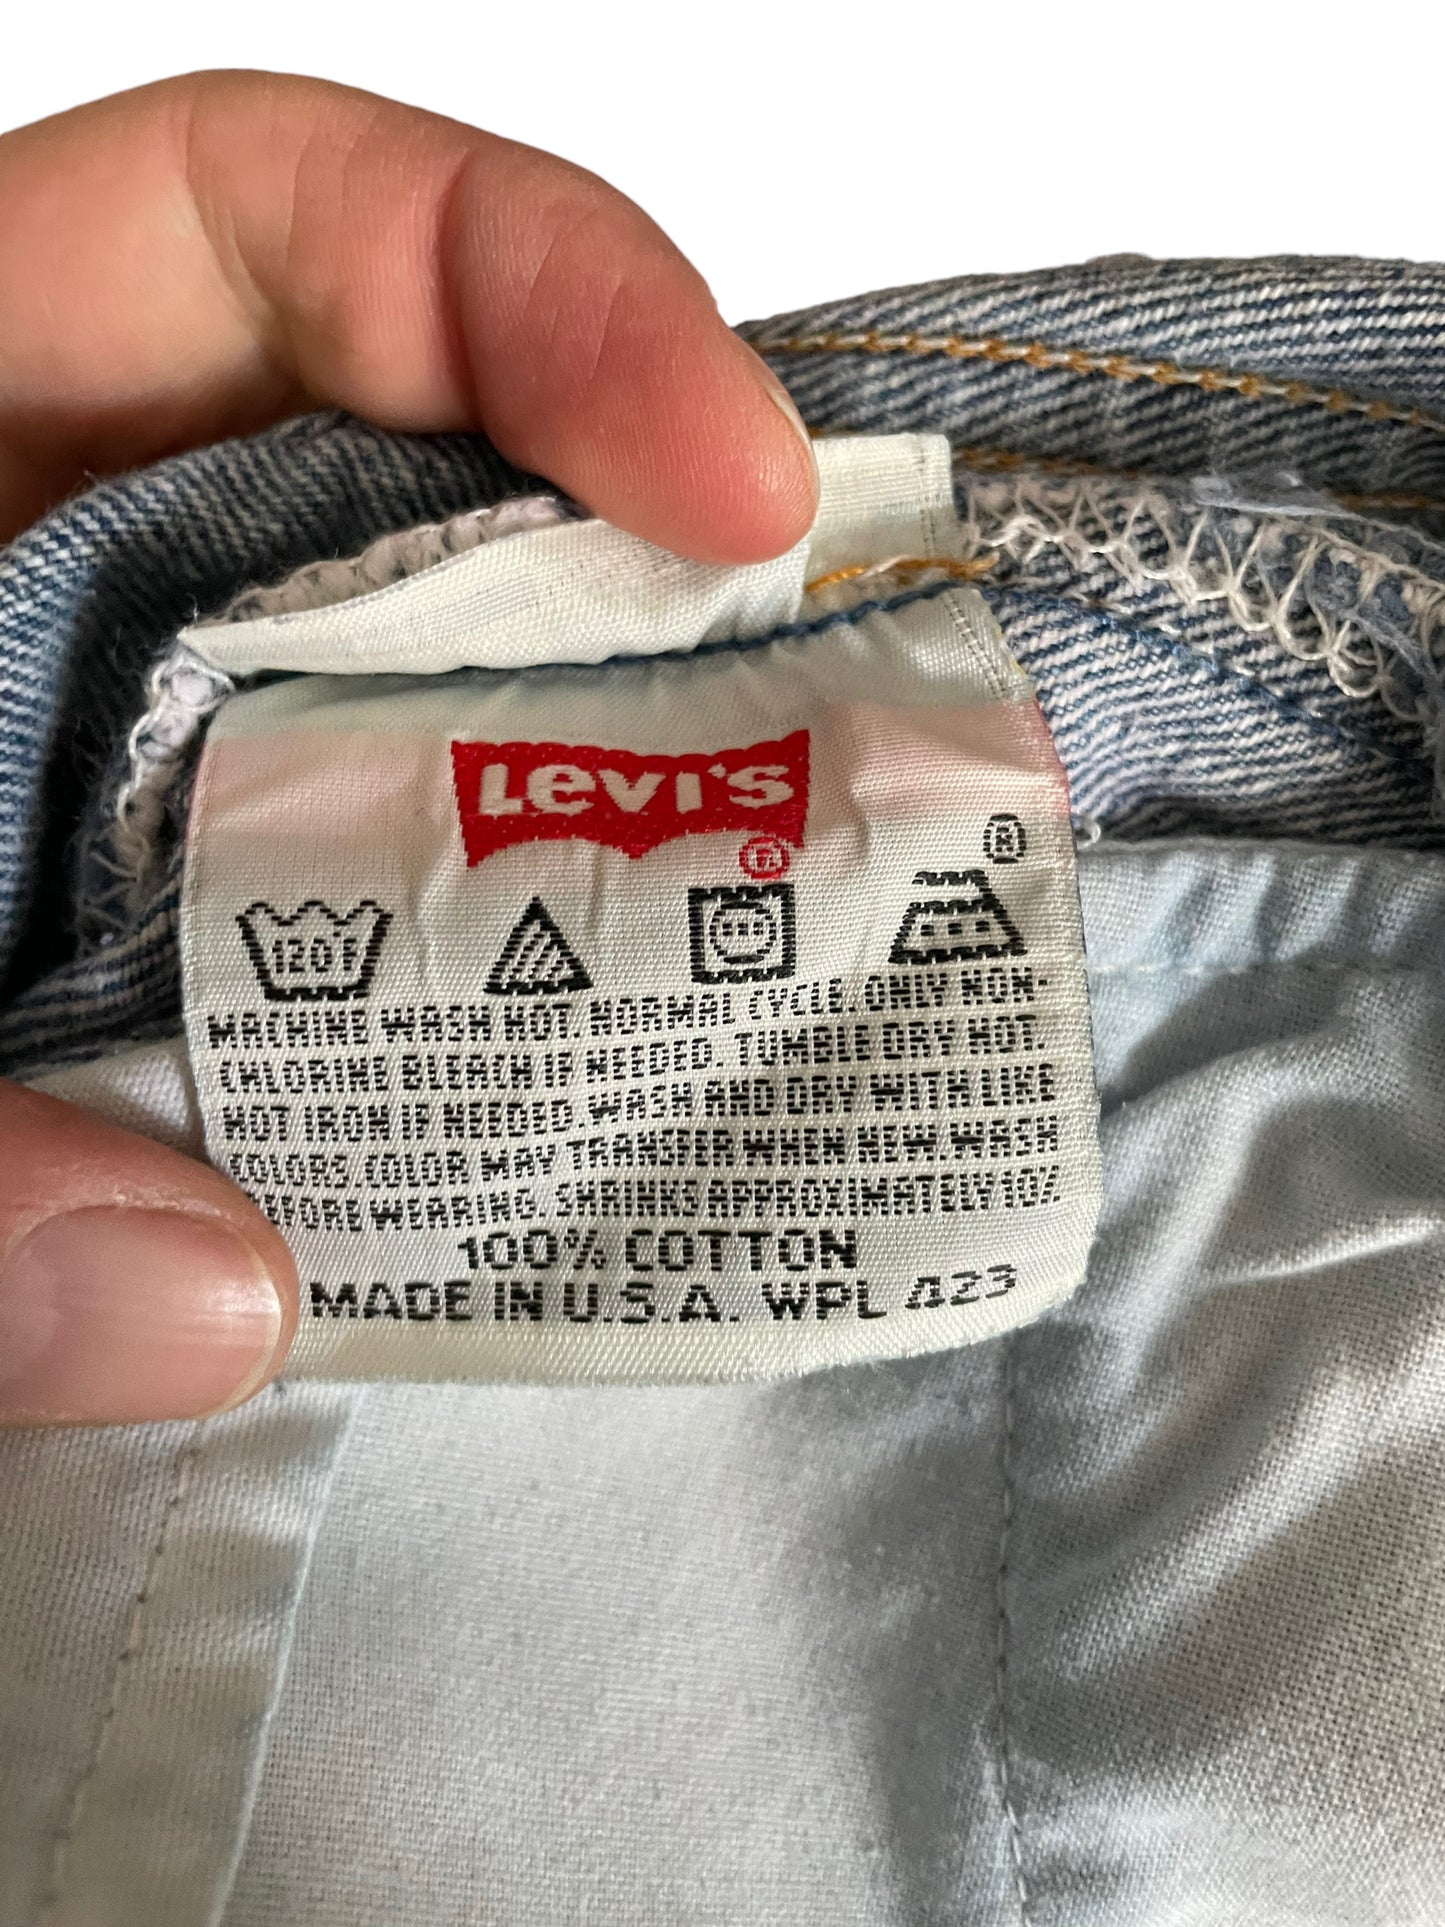 Tag view of Vintage 501xx Levi's 32x33